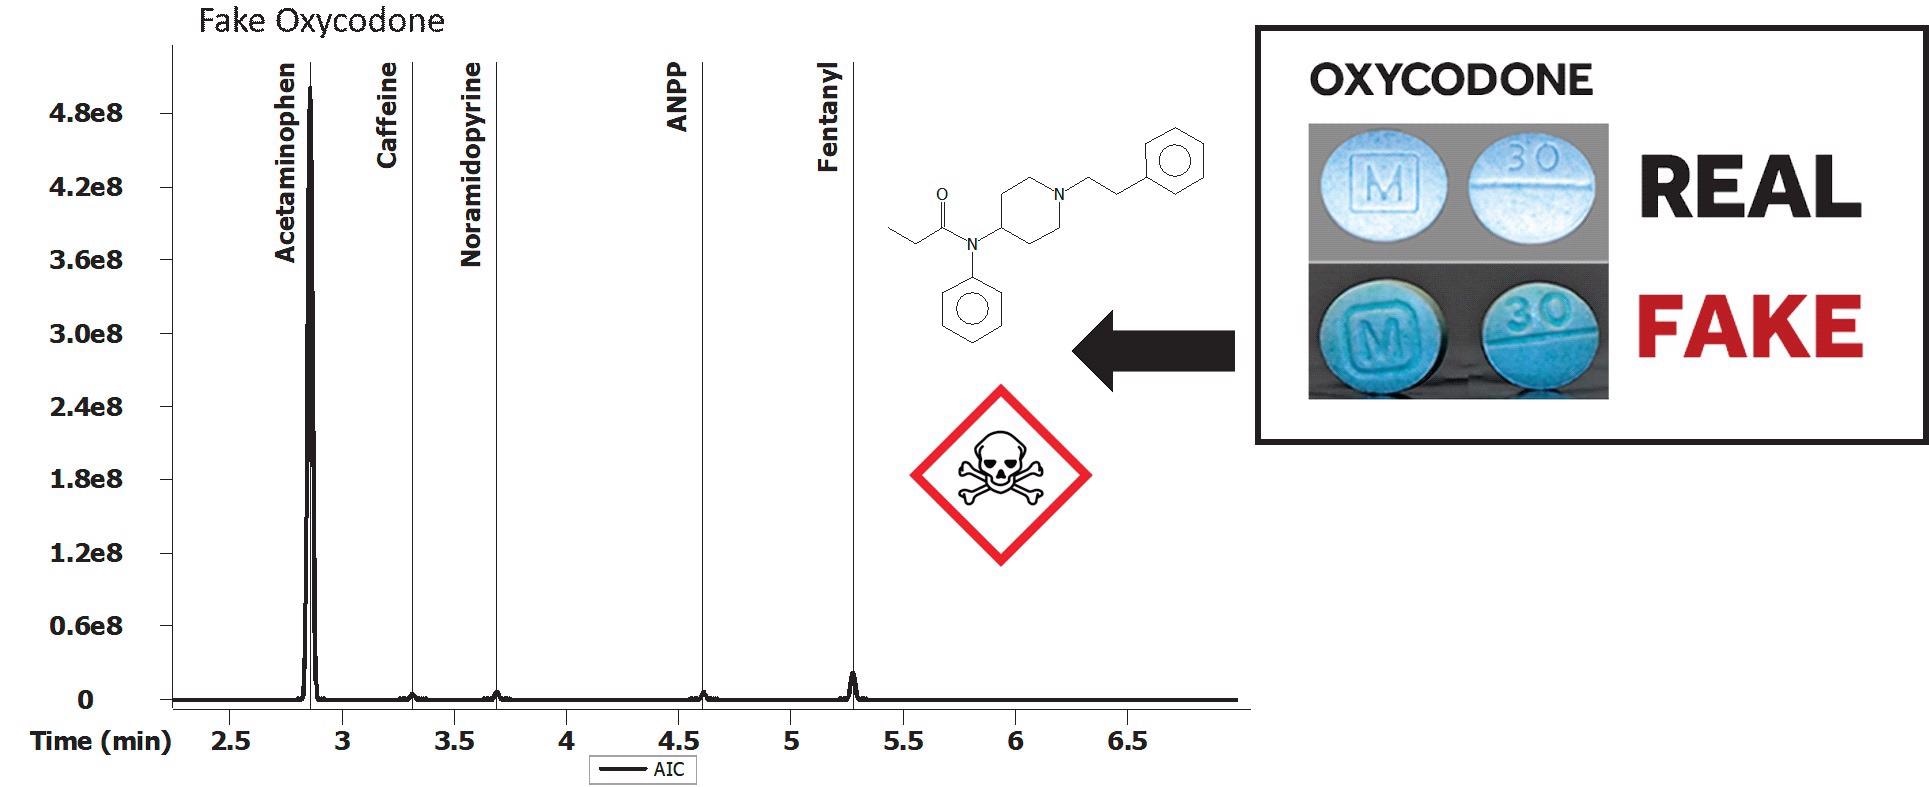 Analytical Ion Chromatogram (AIC) of Fake Oxycodone Tablet Extract and Image Comparing Real vs. Fake Oxycodone tablets, https://www.dea.gov/sites/default/files/2021-09/DEA_Fact_Sheet-Counterfeit_Pills.pdf.